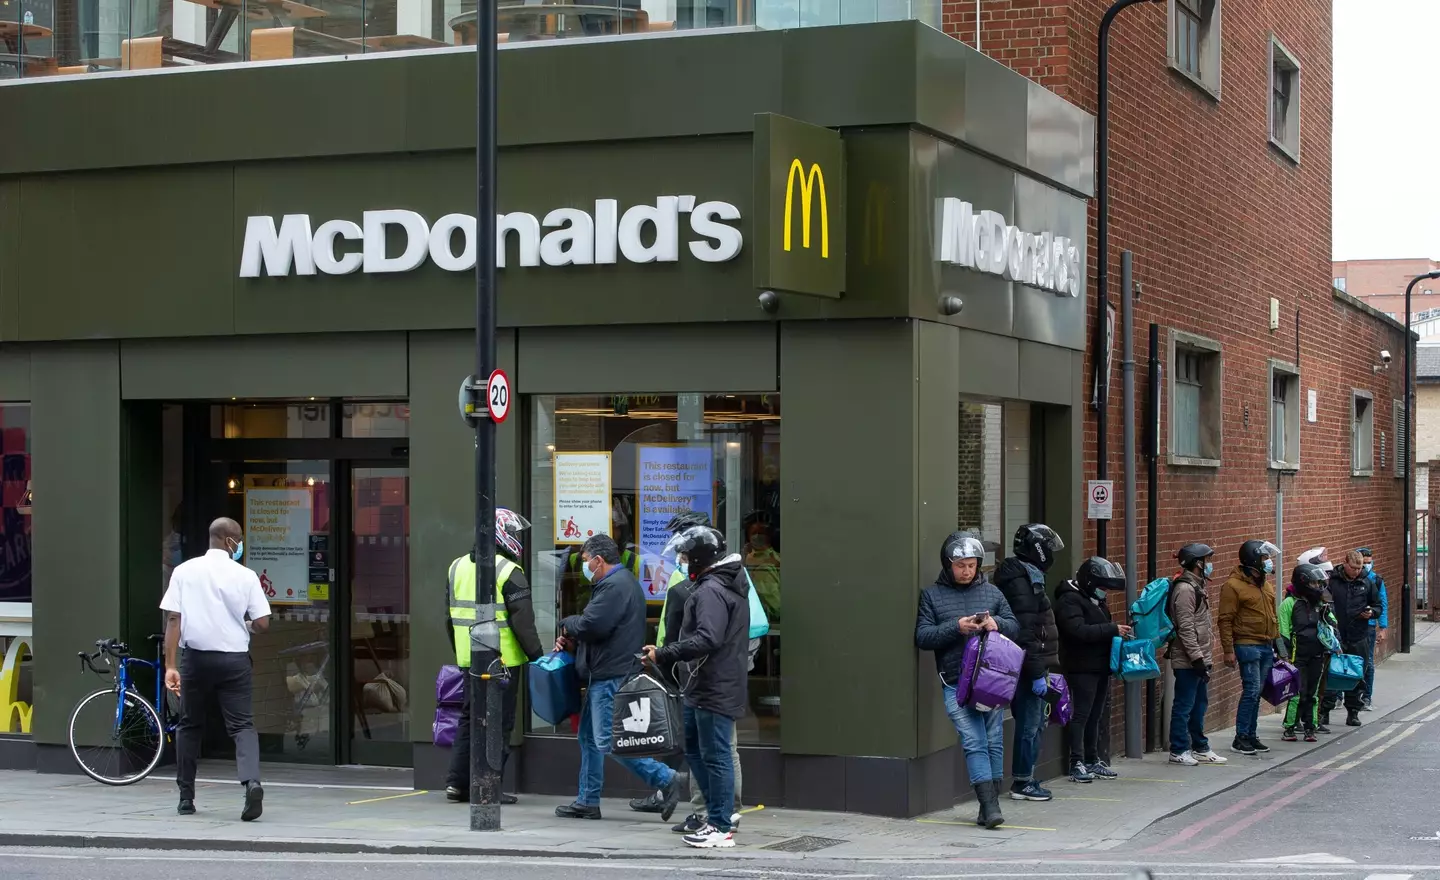 While Imran was stood waiting, McDonald's workers were reportedly 'rushing' to get delivery drivers' orders ready.